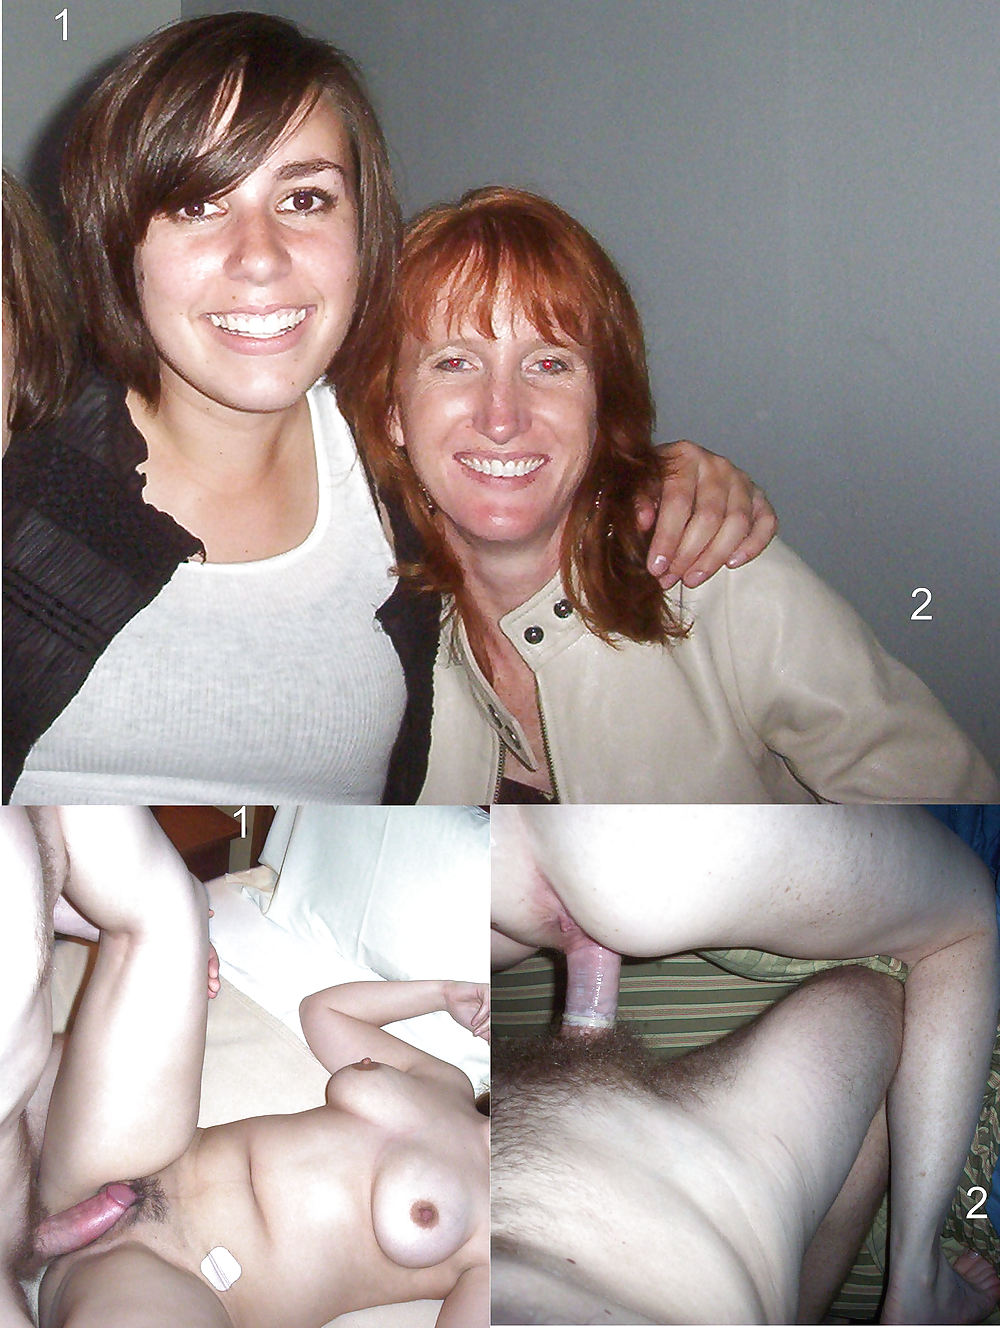 Porn Pics Screwing Work Friends Over a 3 Year Span Pt. 1